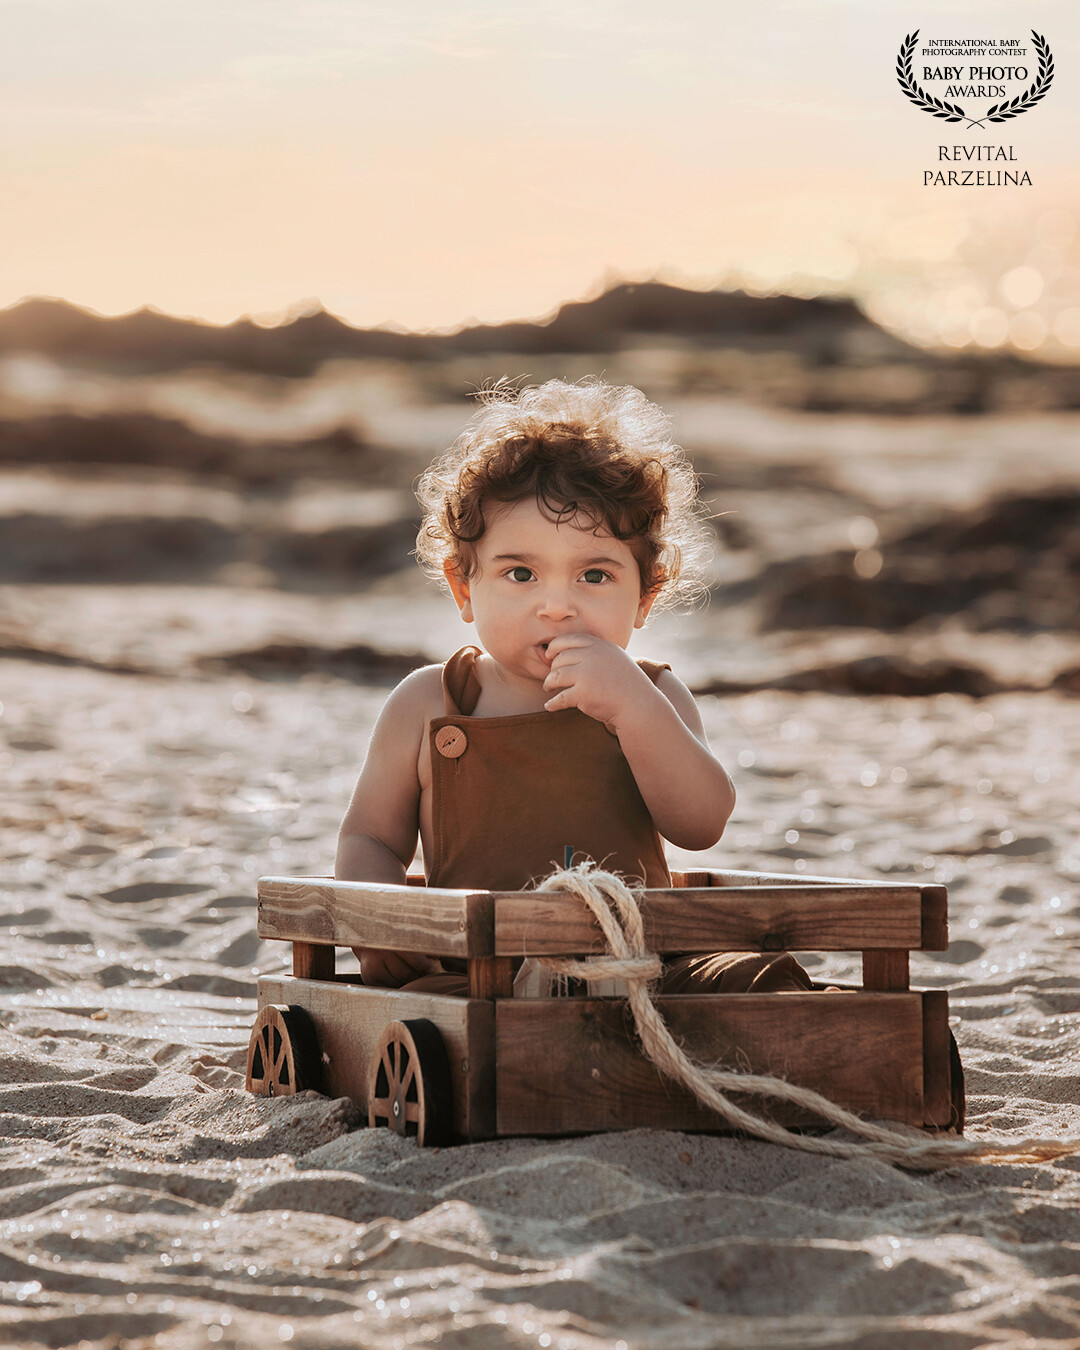 I met sweet Yali at the beach just before sunset on his one year birthday, I brought a wheelbarrow photo prop and that's how I made Yali busy playing and I captured a magical photo!